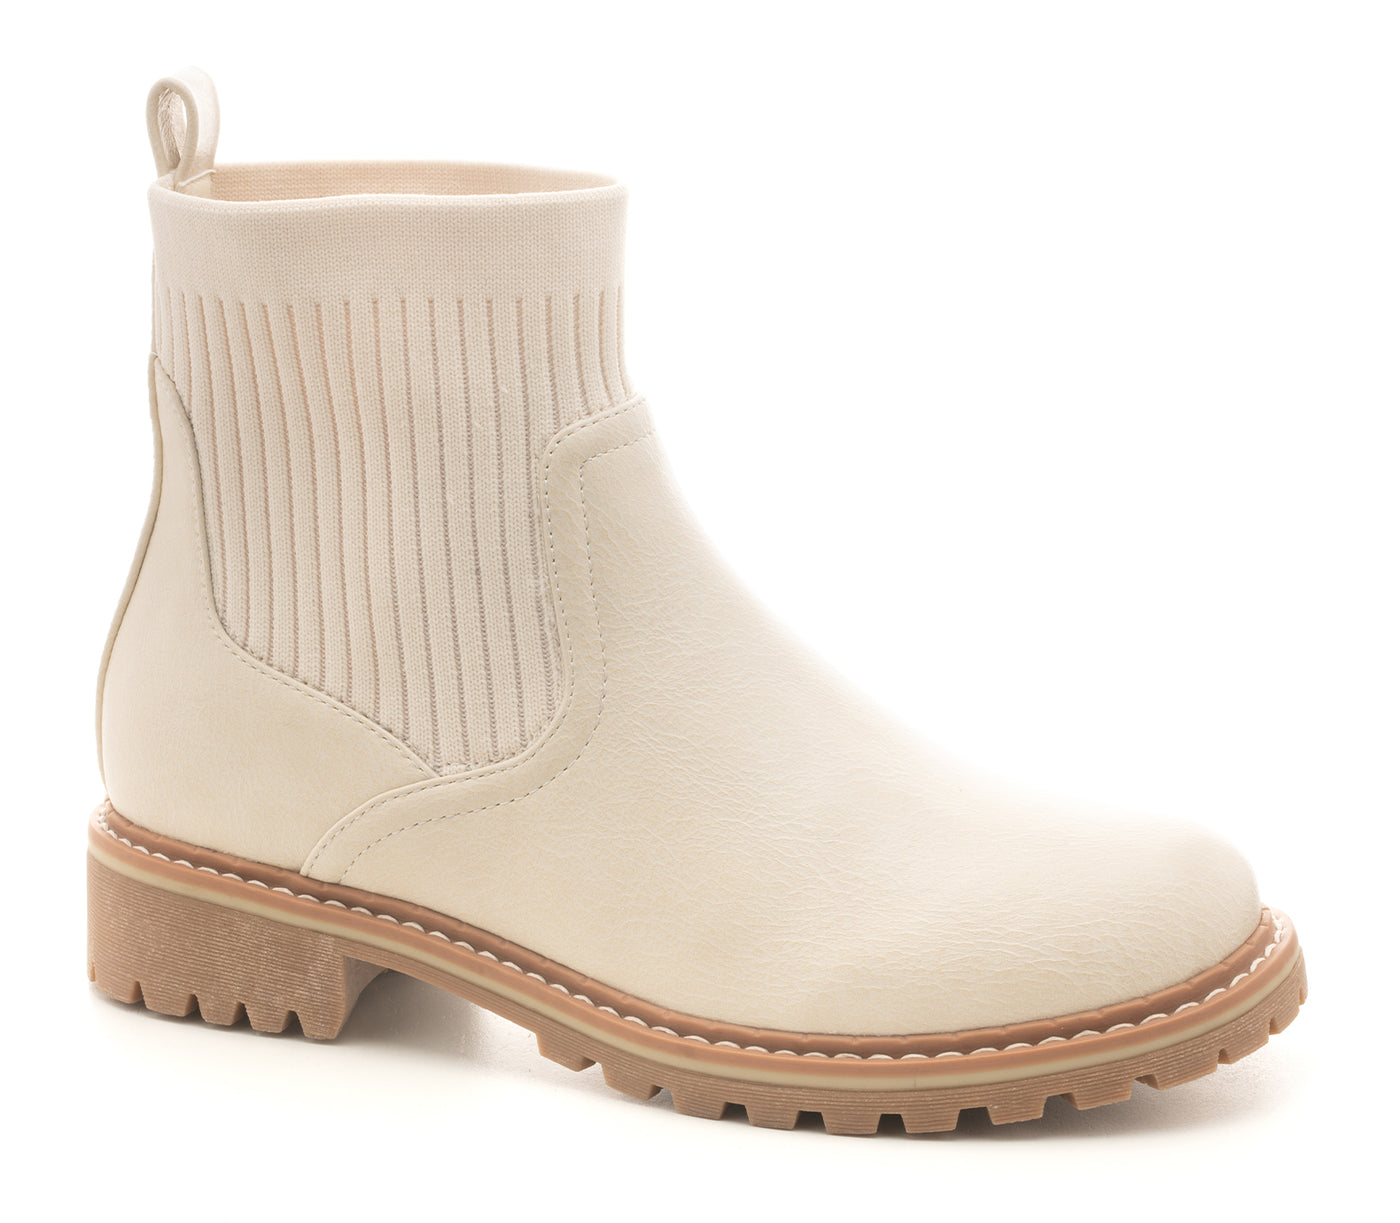 Cabin Fever Size 7 Boots - Cream Corkys